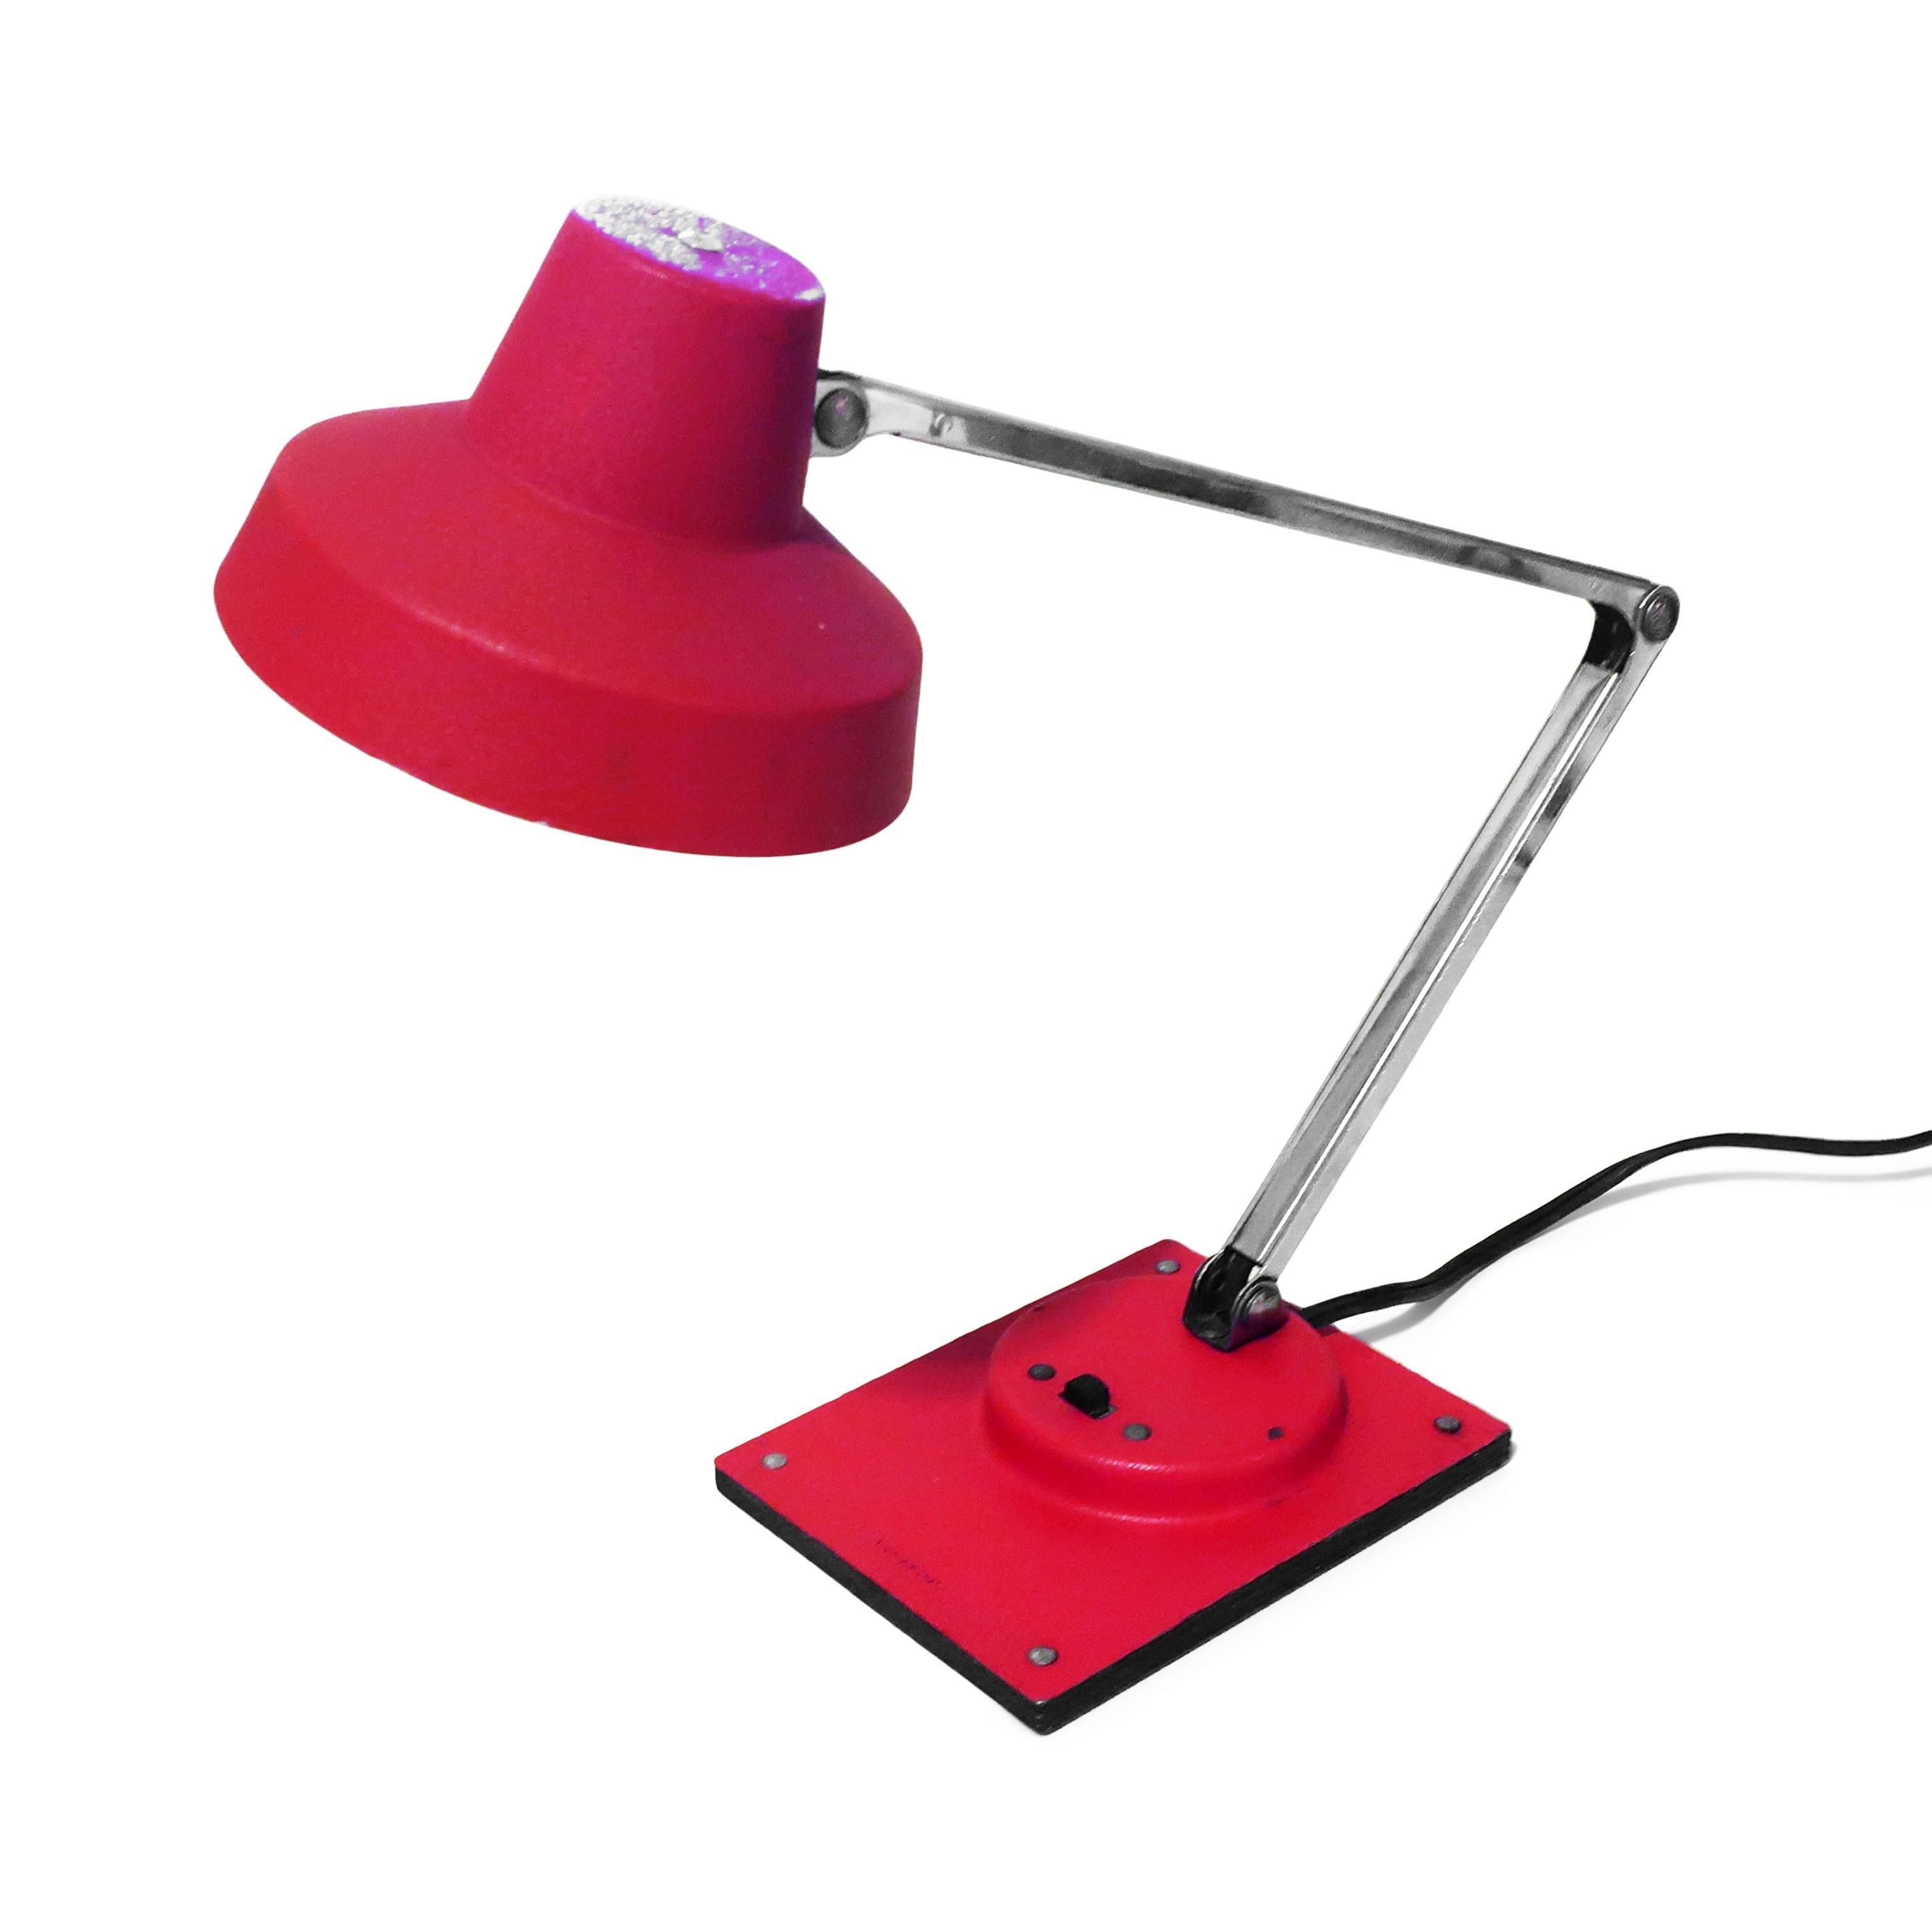 A perfect mid-century modern Tensor IL 400 articulating desk lamp.  Red textured base and shade, chrome stem, and switch on the base.  In good vintage condition.

4